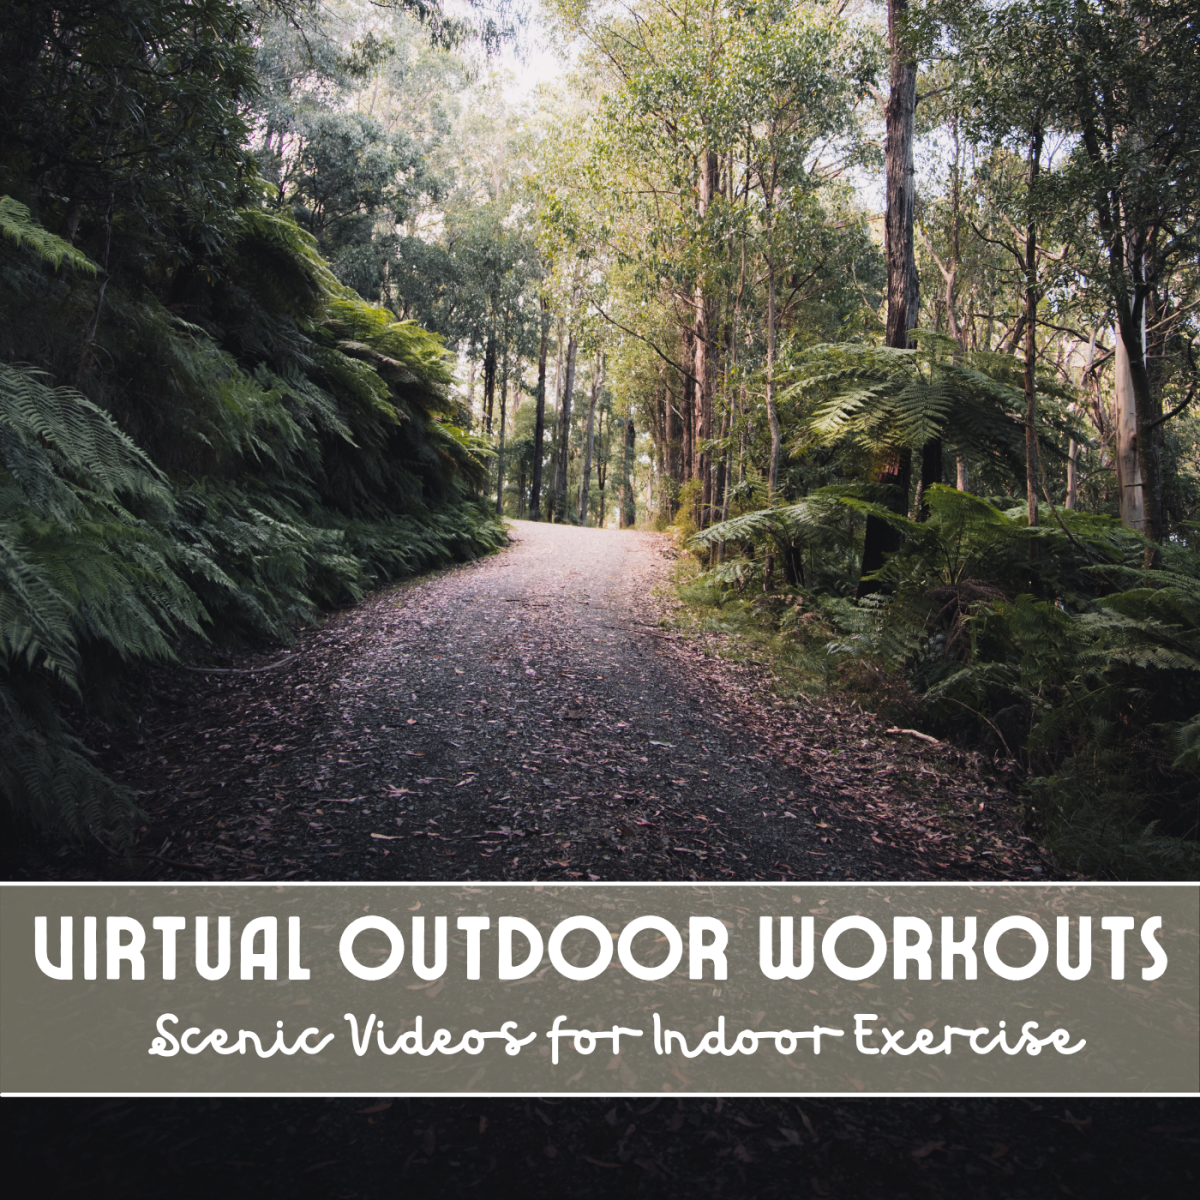 Watch scenic exercise videos for a virtual outdoor workout.